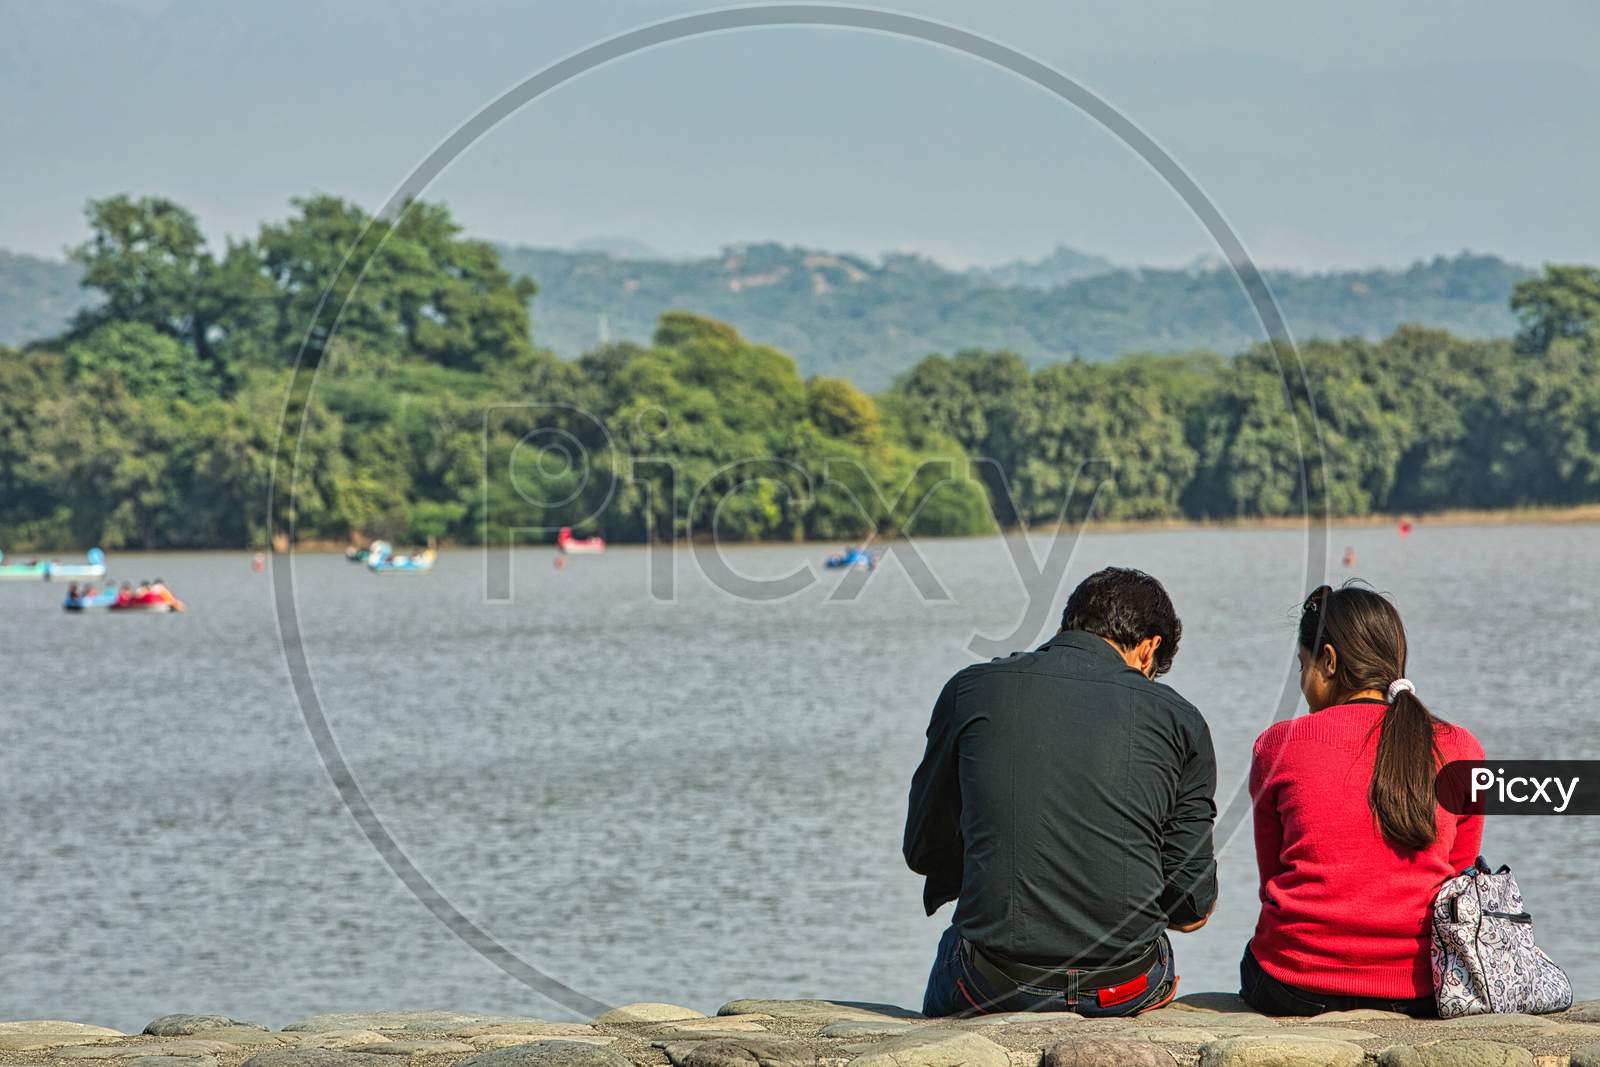 Chandigarh, India - November 26Th, 2012: A Couple Chatting On The Bank Of Sukhna Lake In Chandigarh, India. It Is A Man Made Reservoir At The Foothills Of The Himalayas